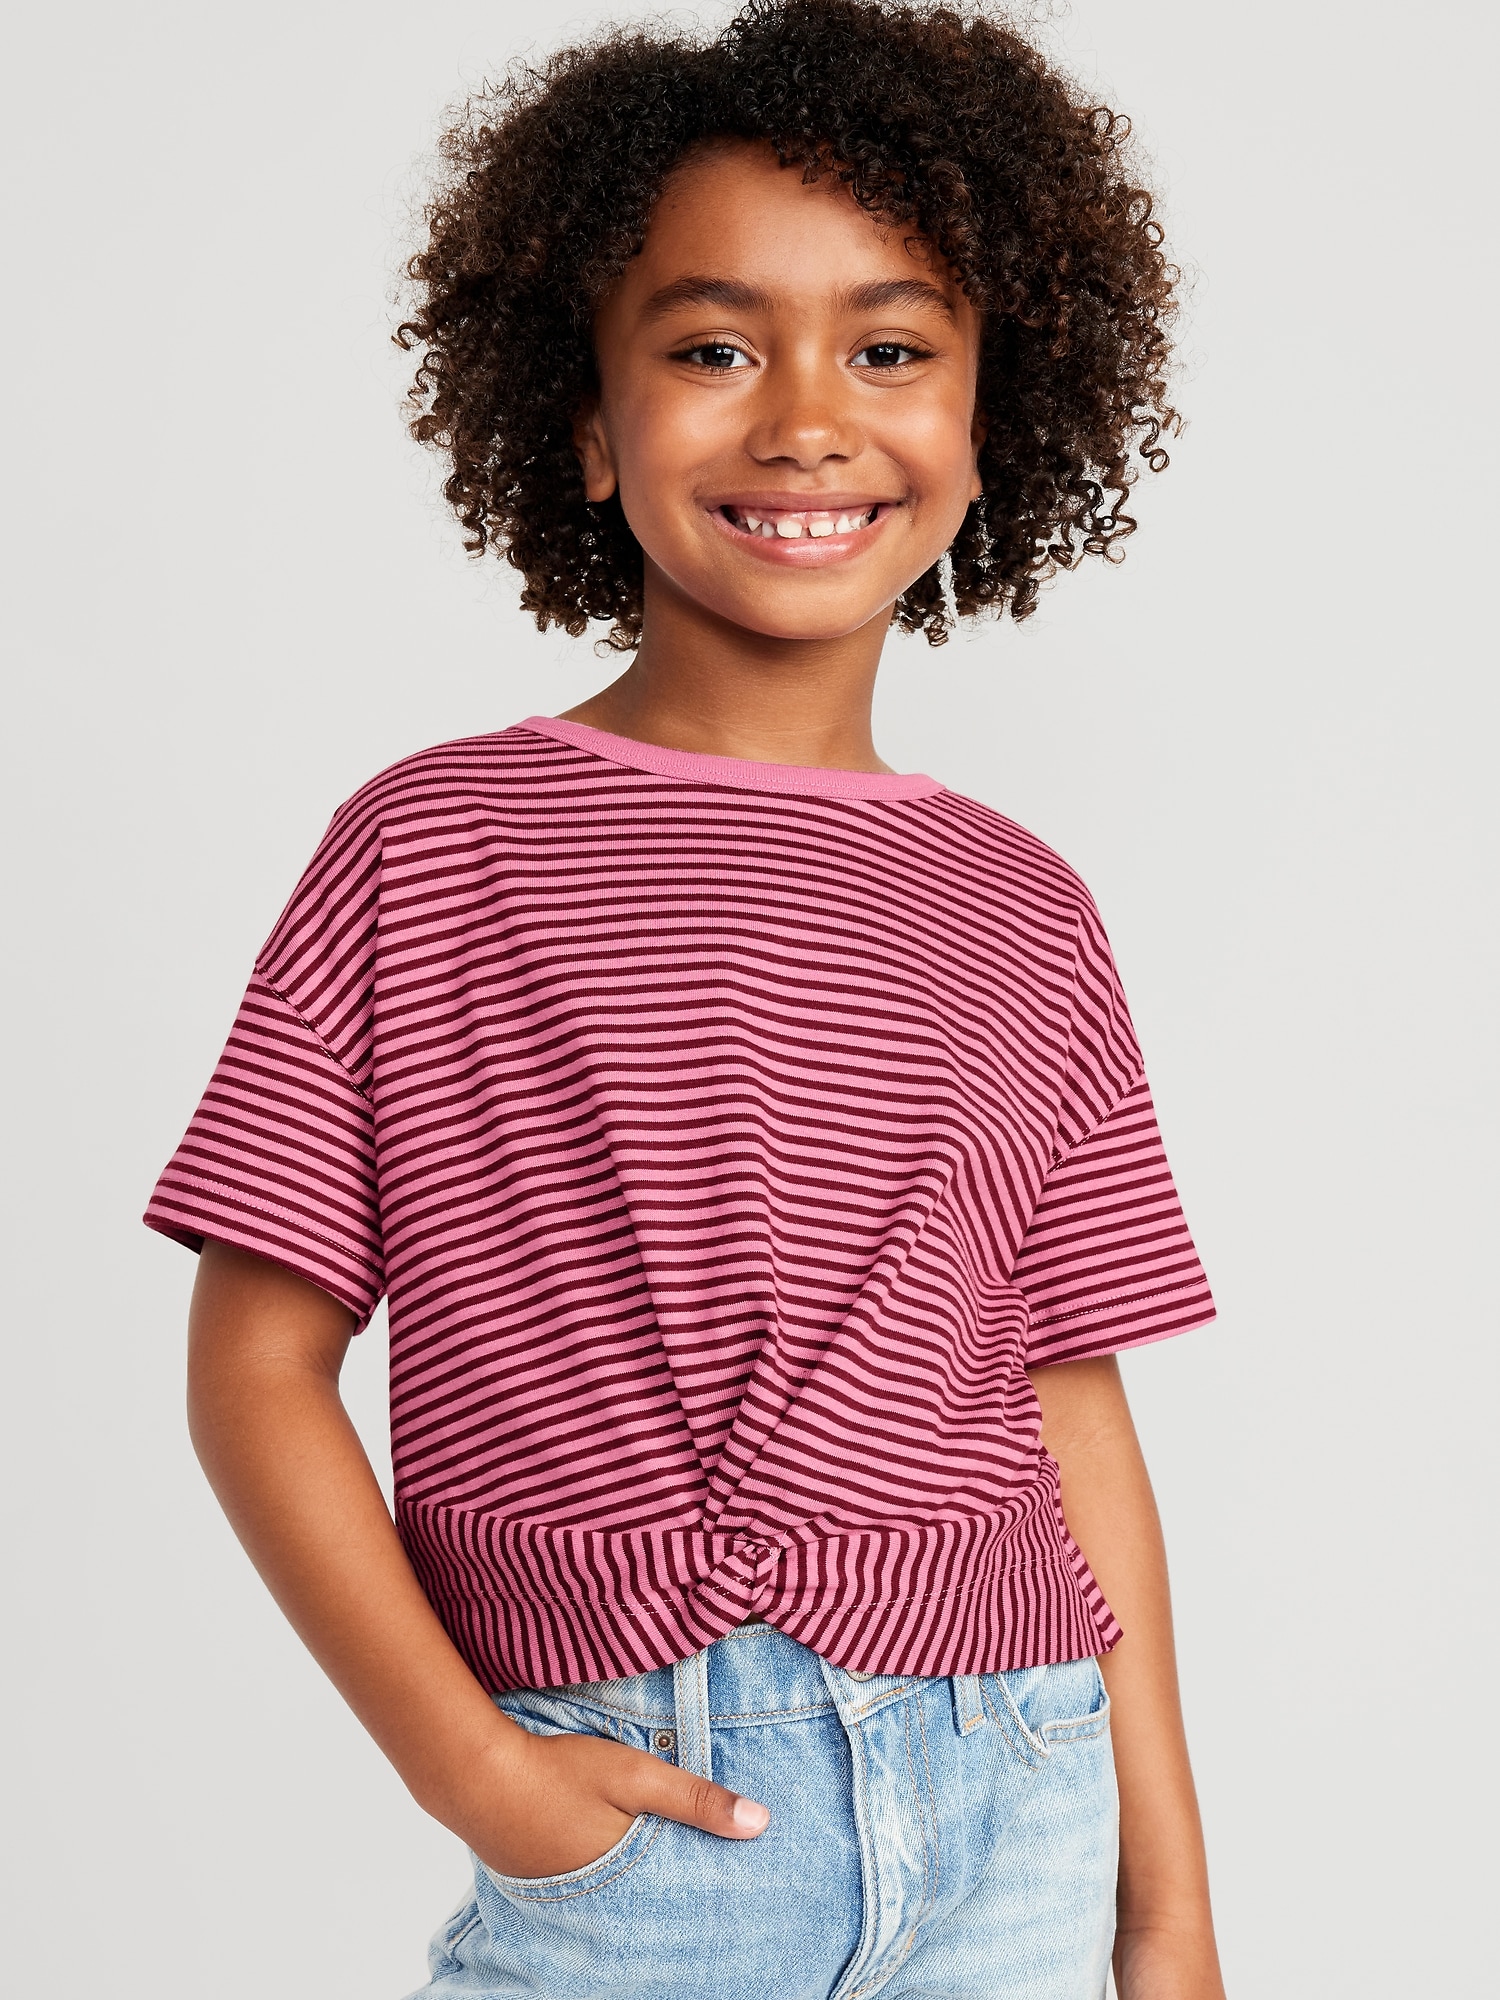  simtuor Girls Short Sleeve Pullover Striped T-shirts